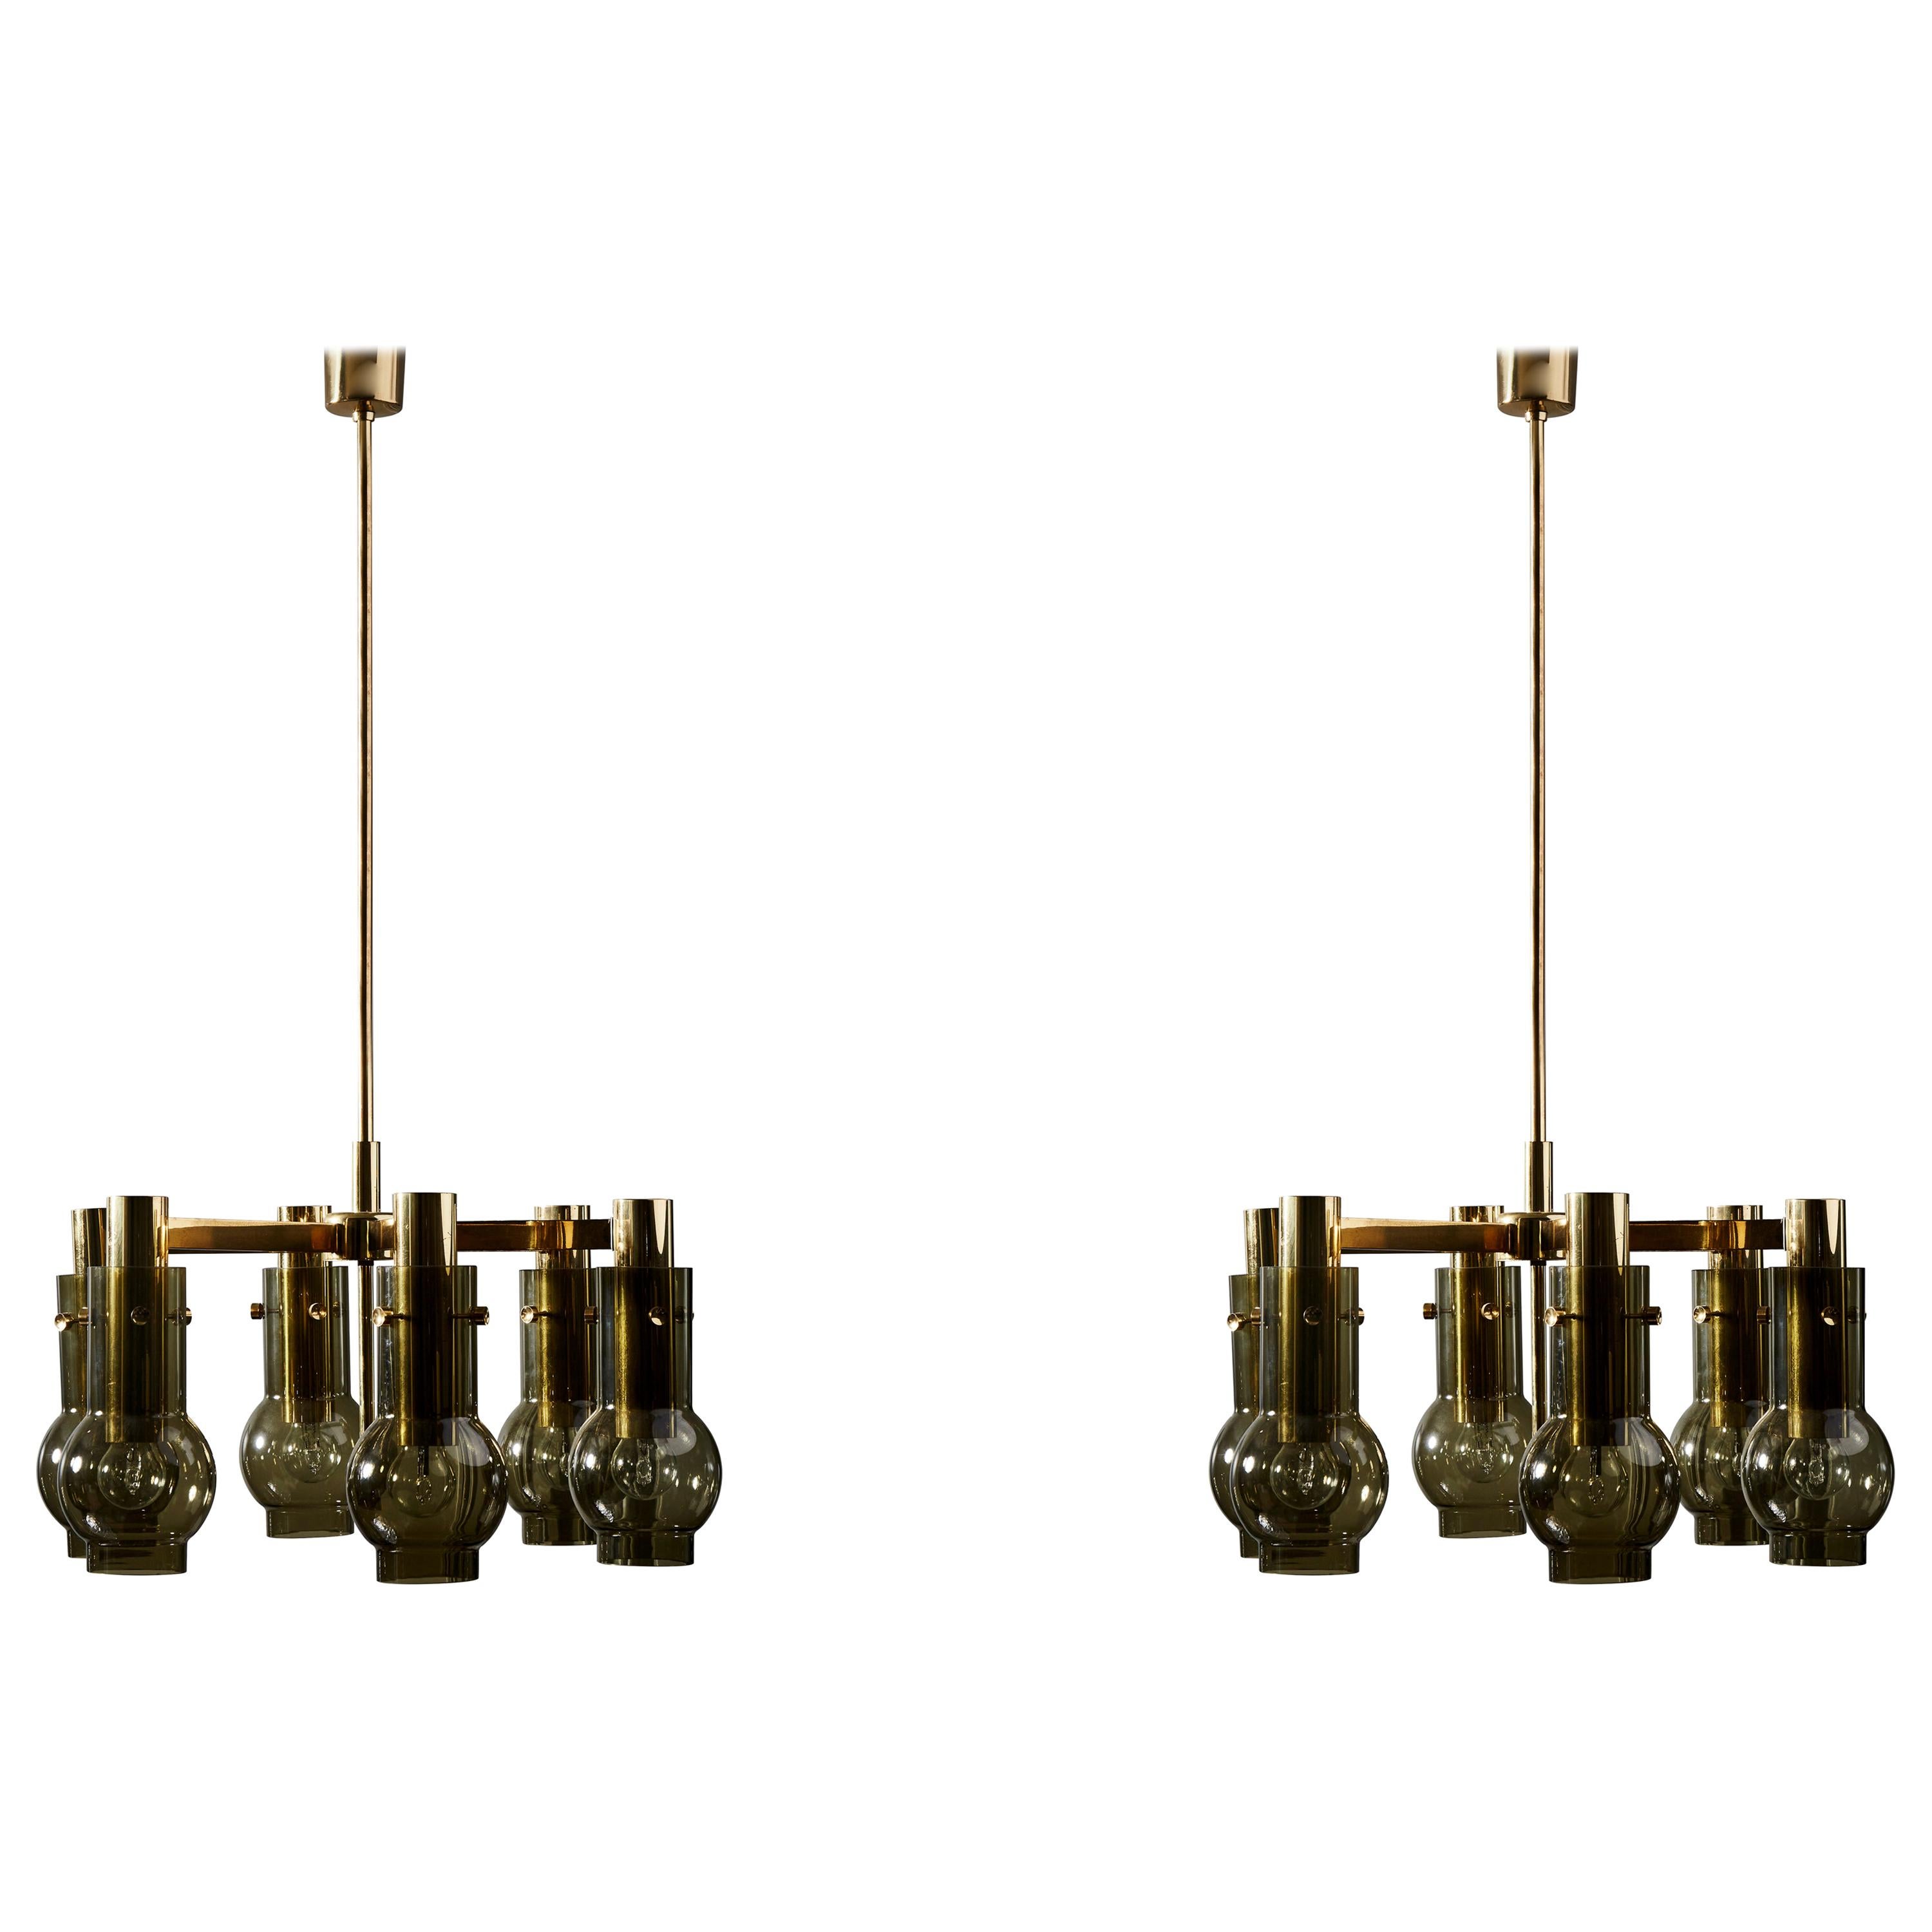 Pair of Hans Agne Jakobsson Six Arms Chandeliers with Smoke Grey Glass Shades